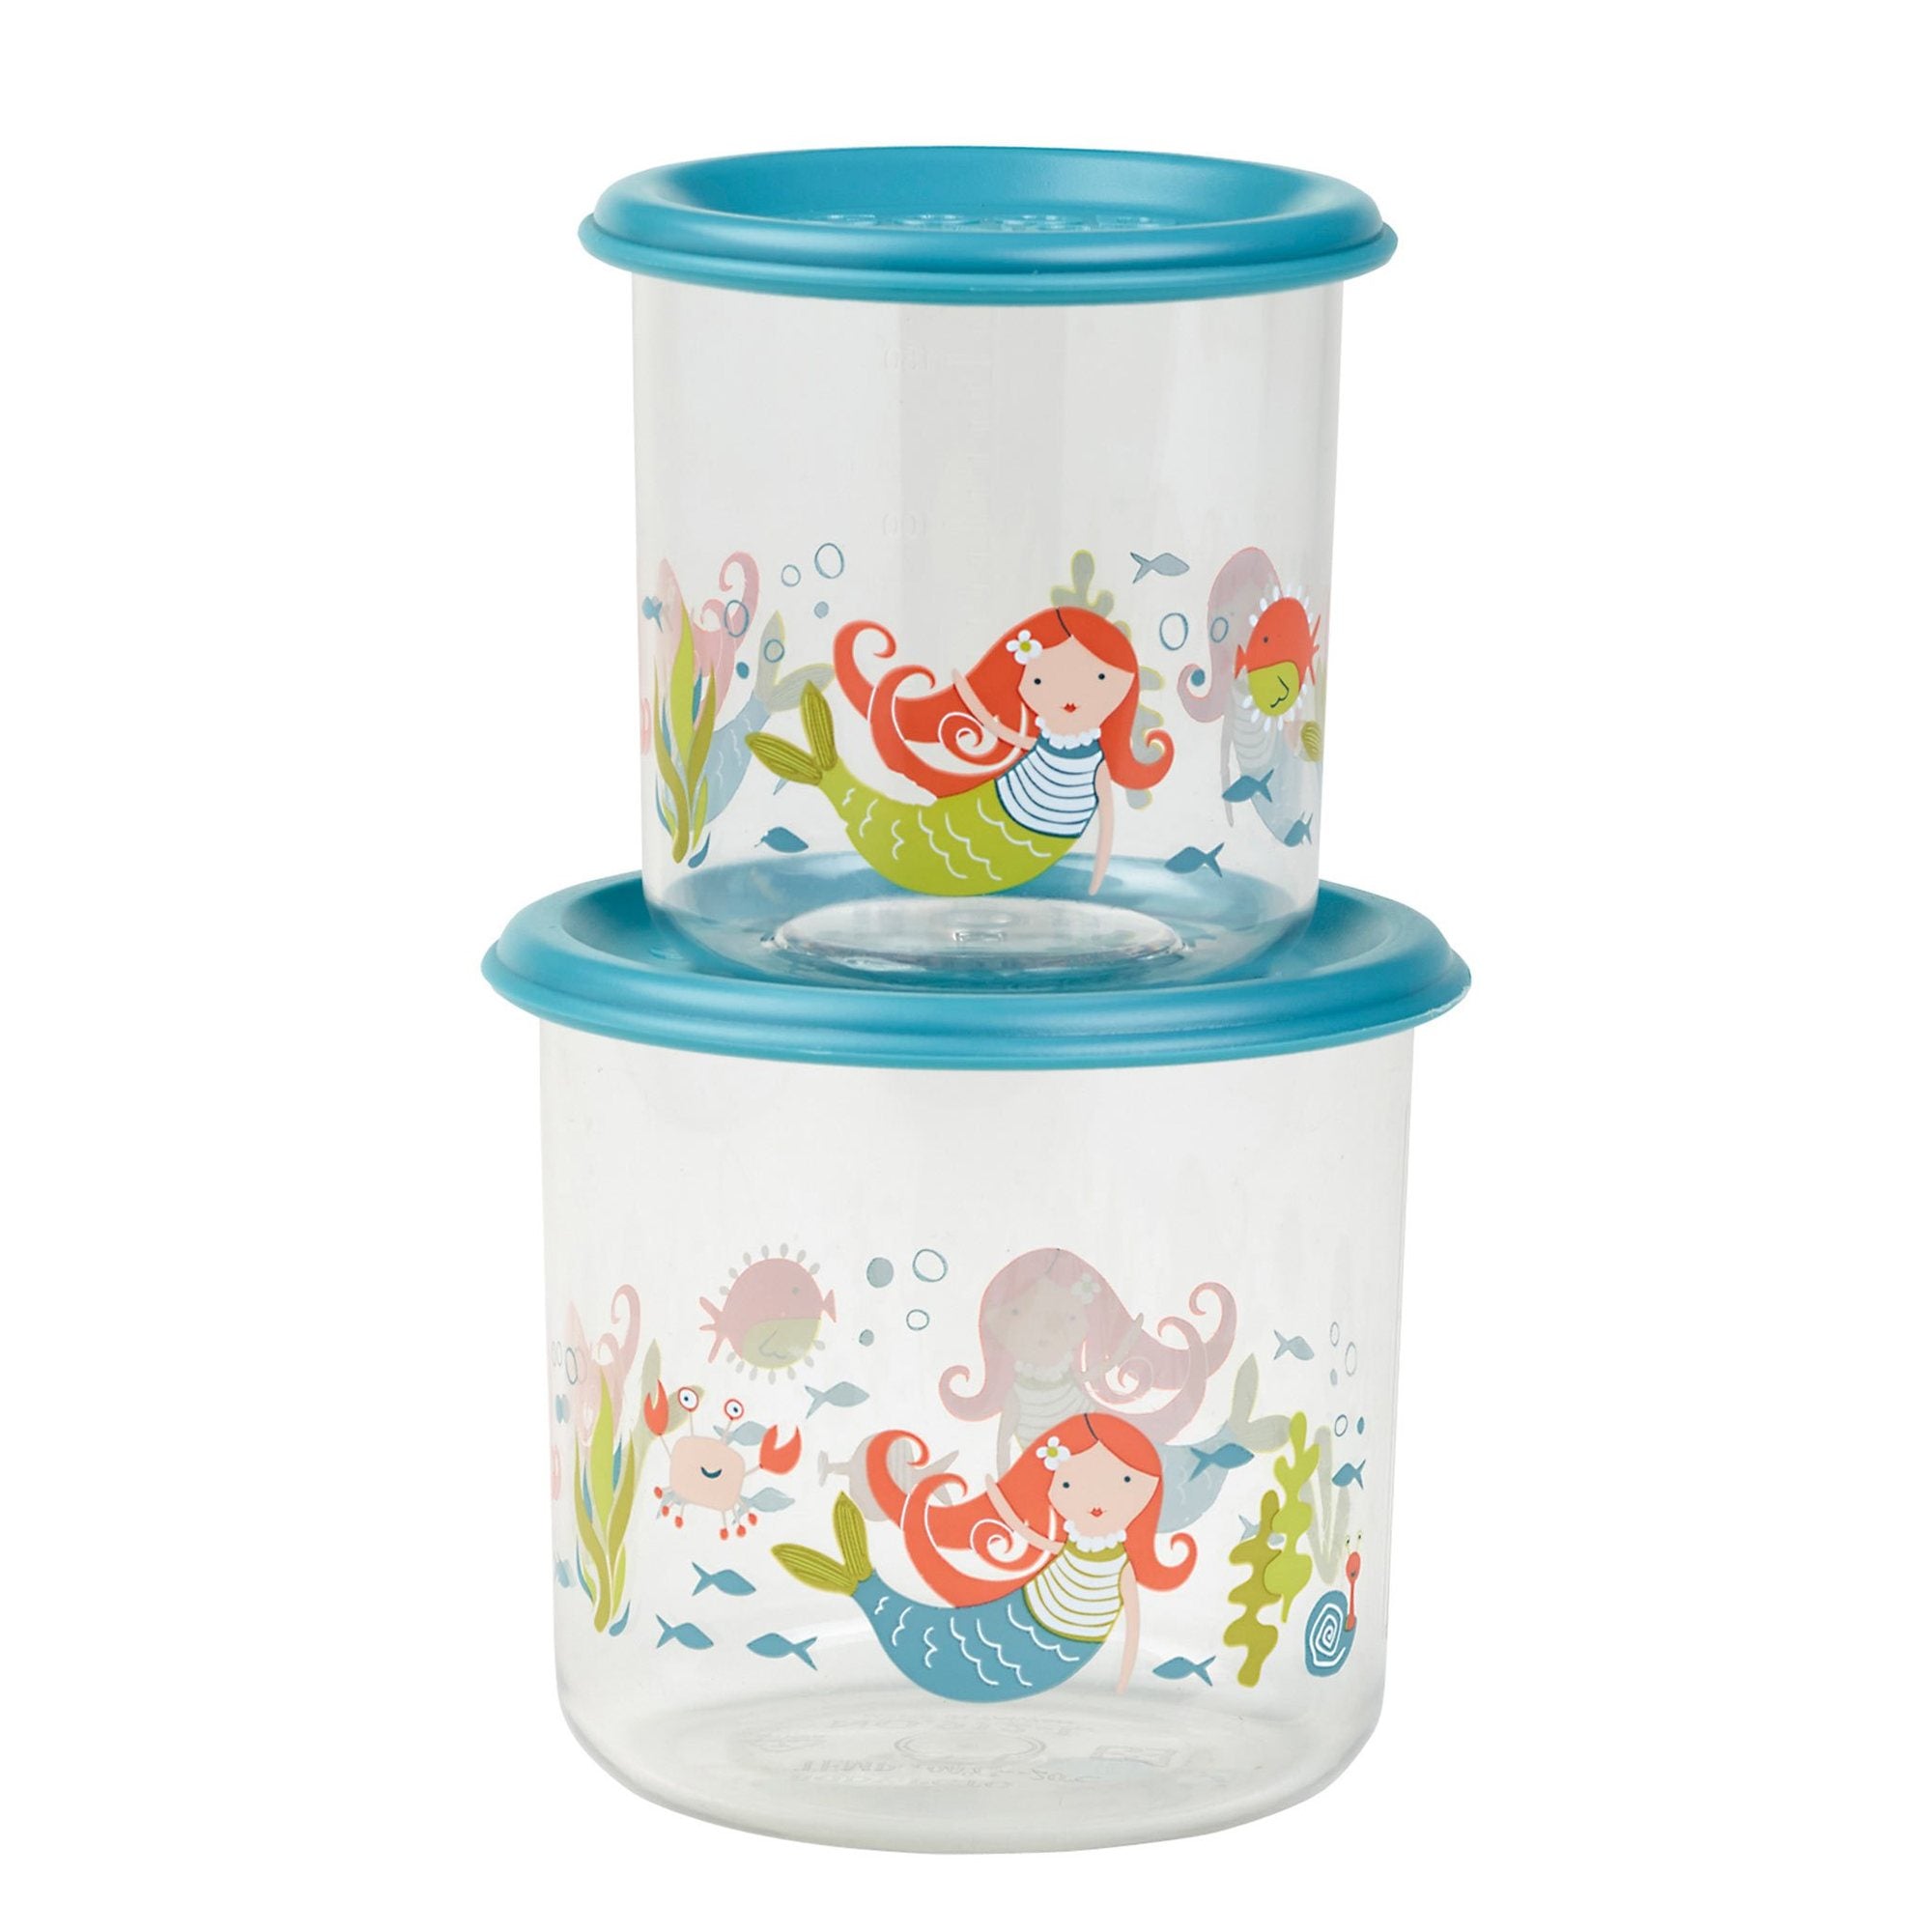 Ore - Good Lunch Snack Containers Large set-of-two - Baby Otter